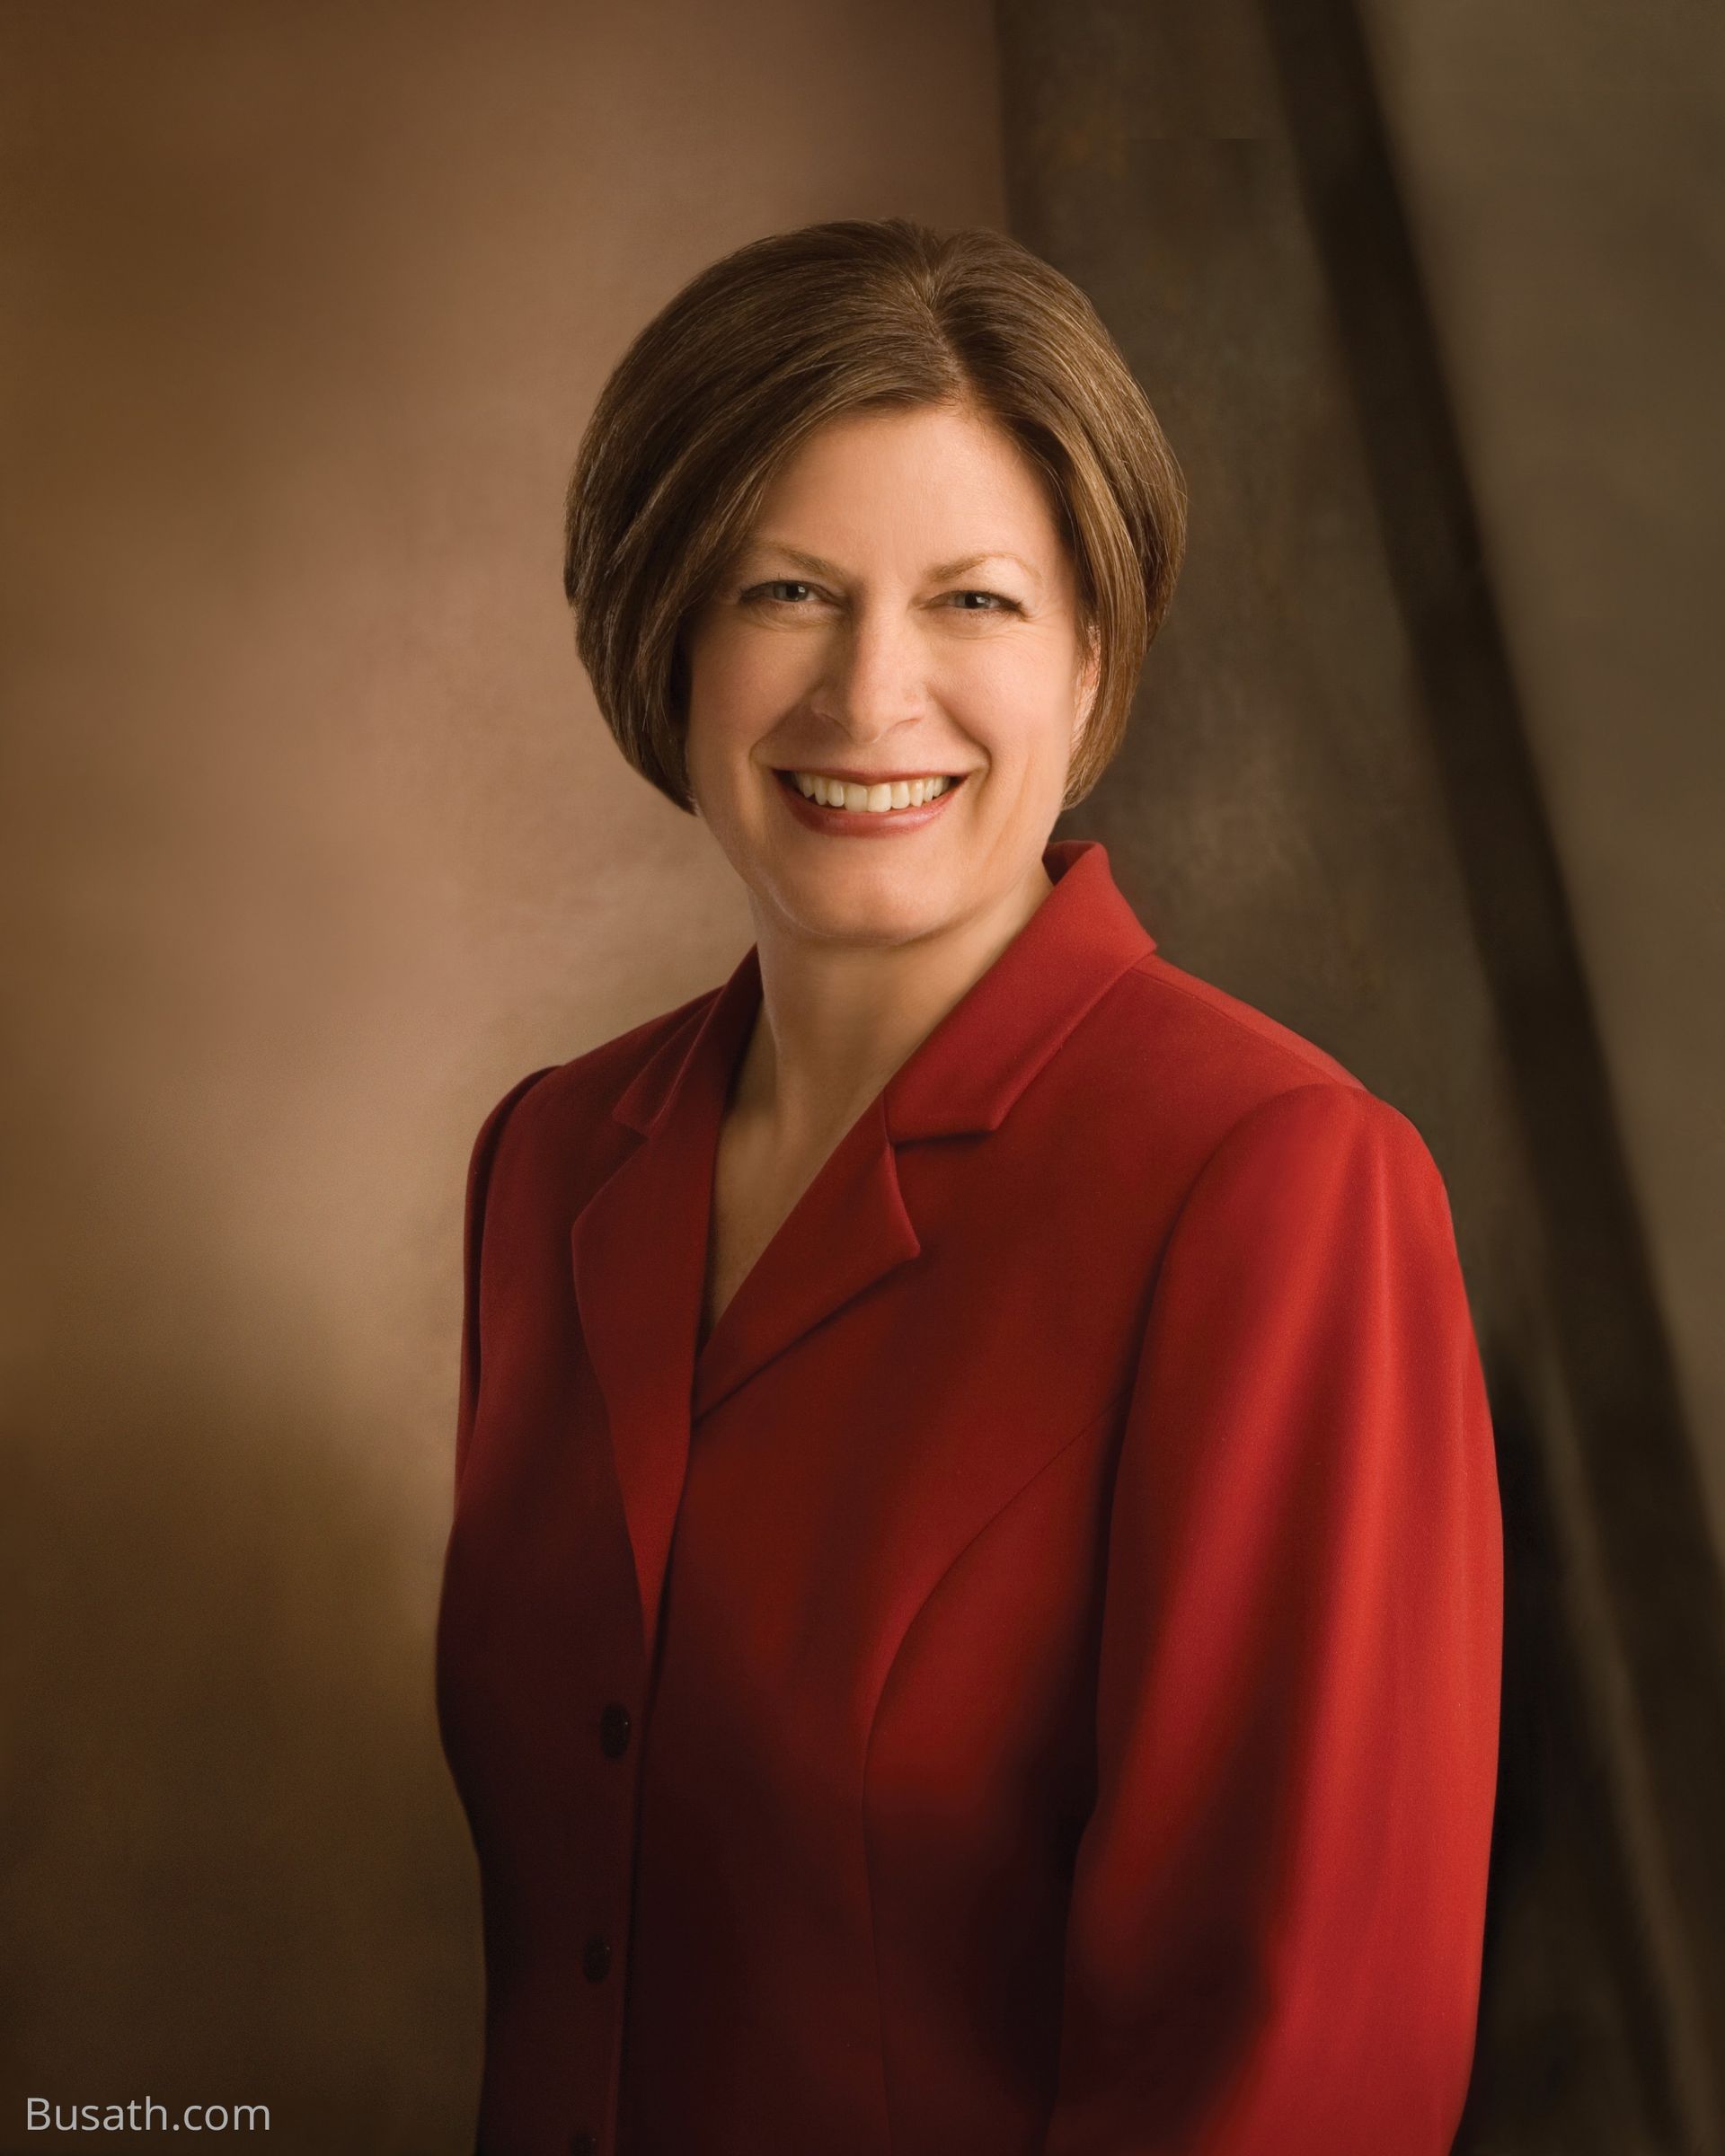 A portrait of Julie Bangerter Beck, who was the 15th general president of the Relief Society from 2007 to 2012.